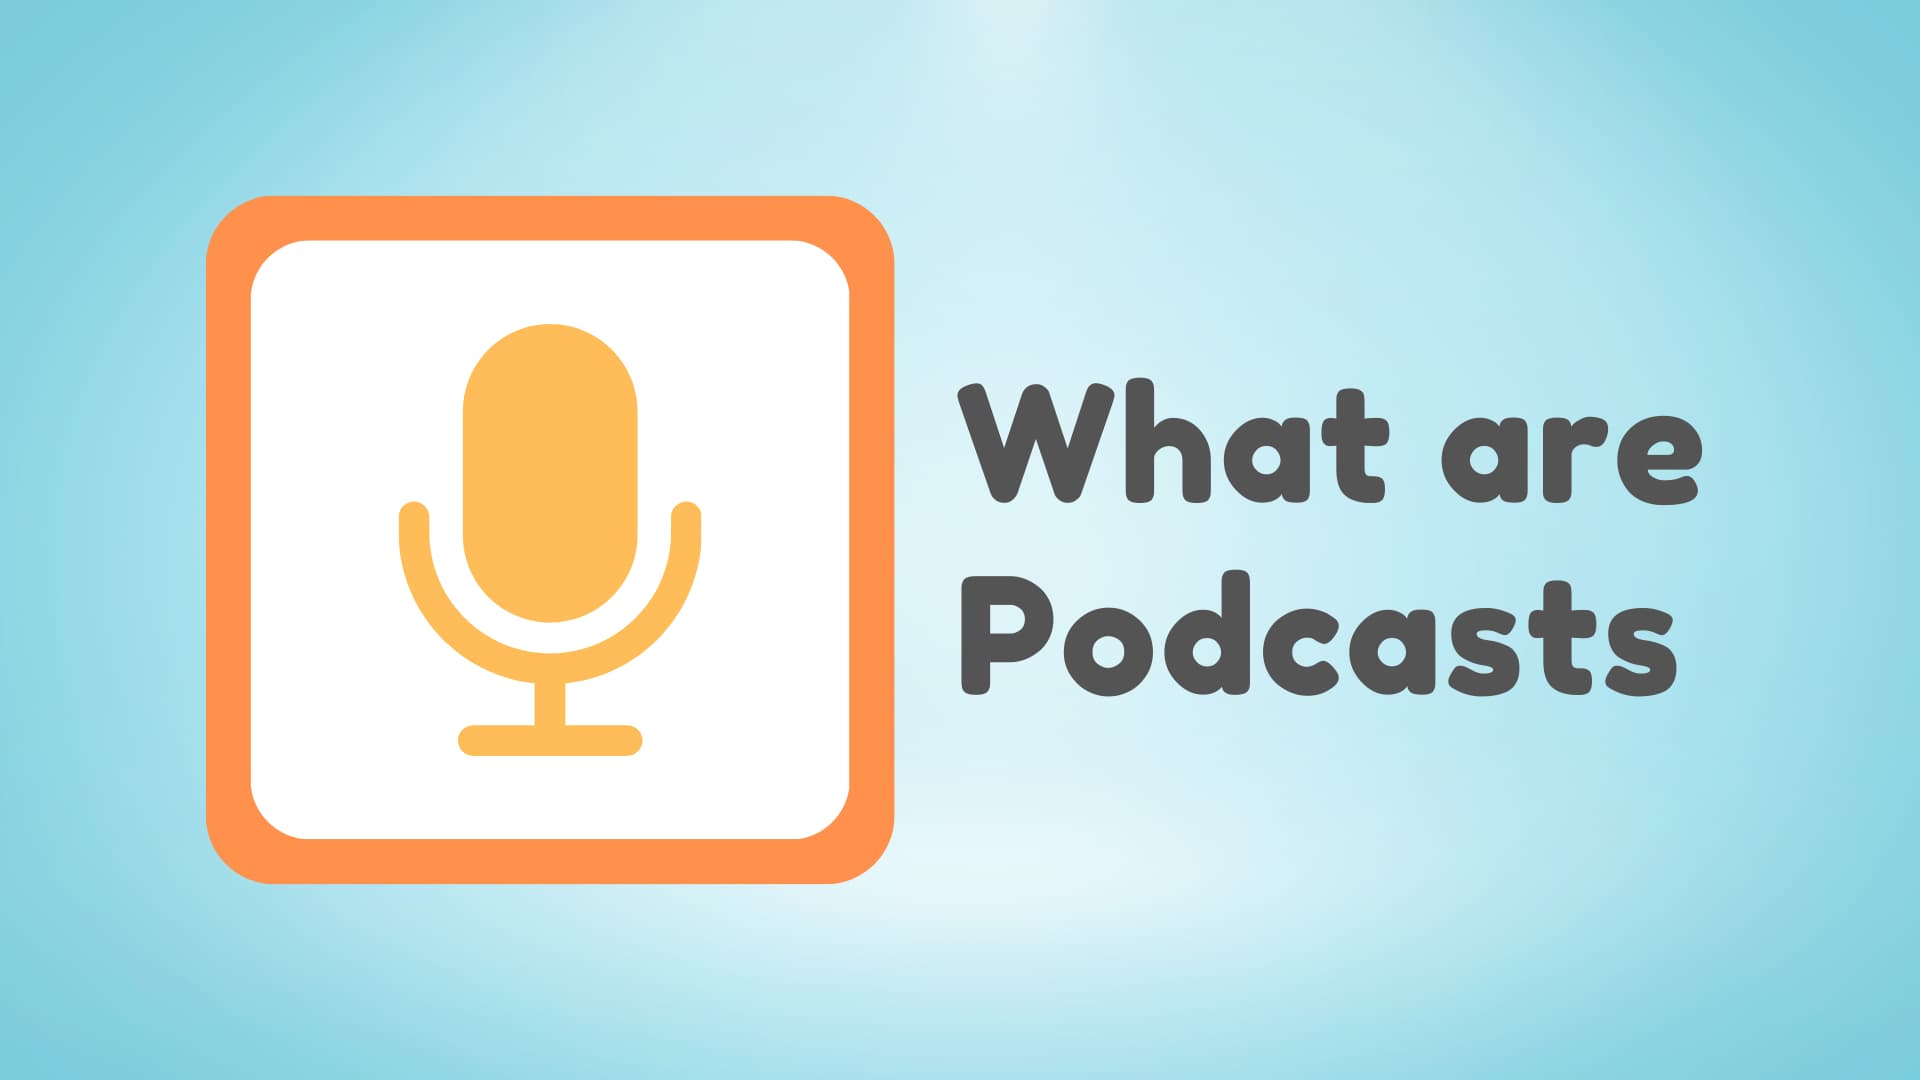 Everything You Need to Know About Podcasts and How to Create Your Own